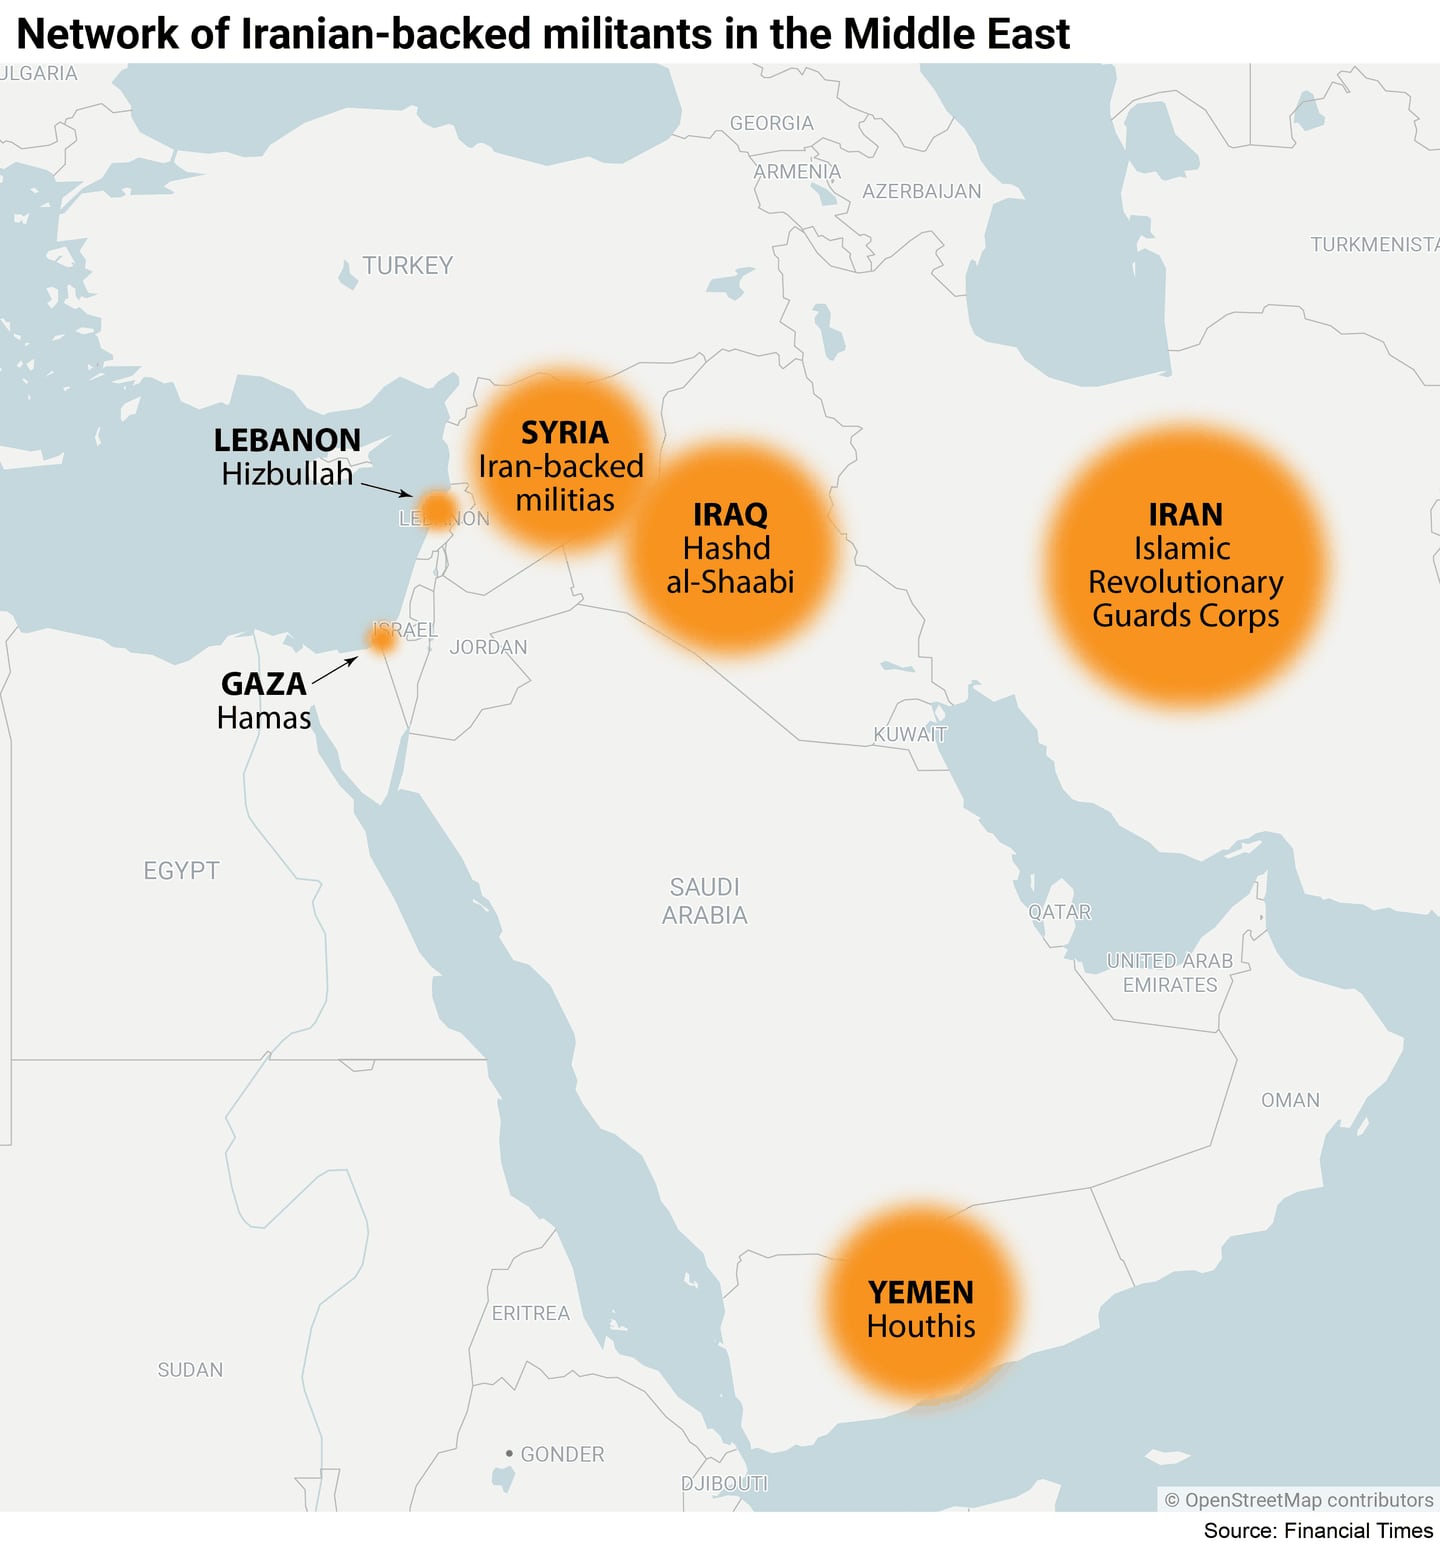 Network of Iranian-backed militants in the Middle East